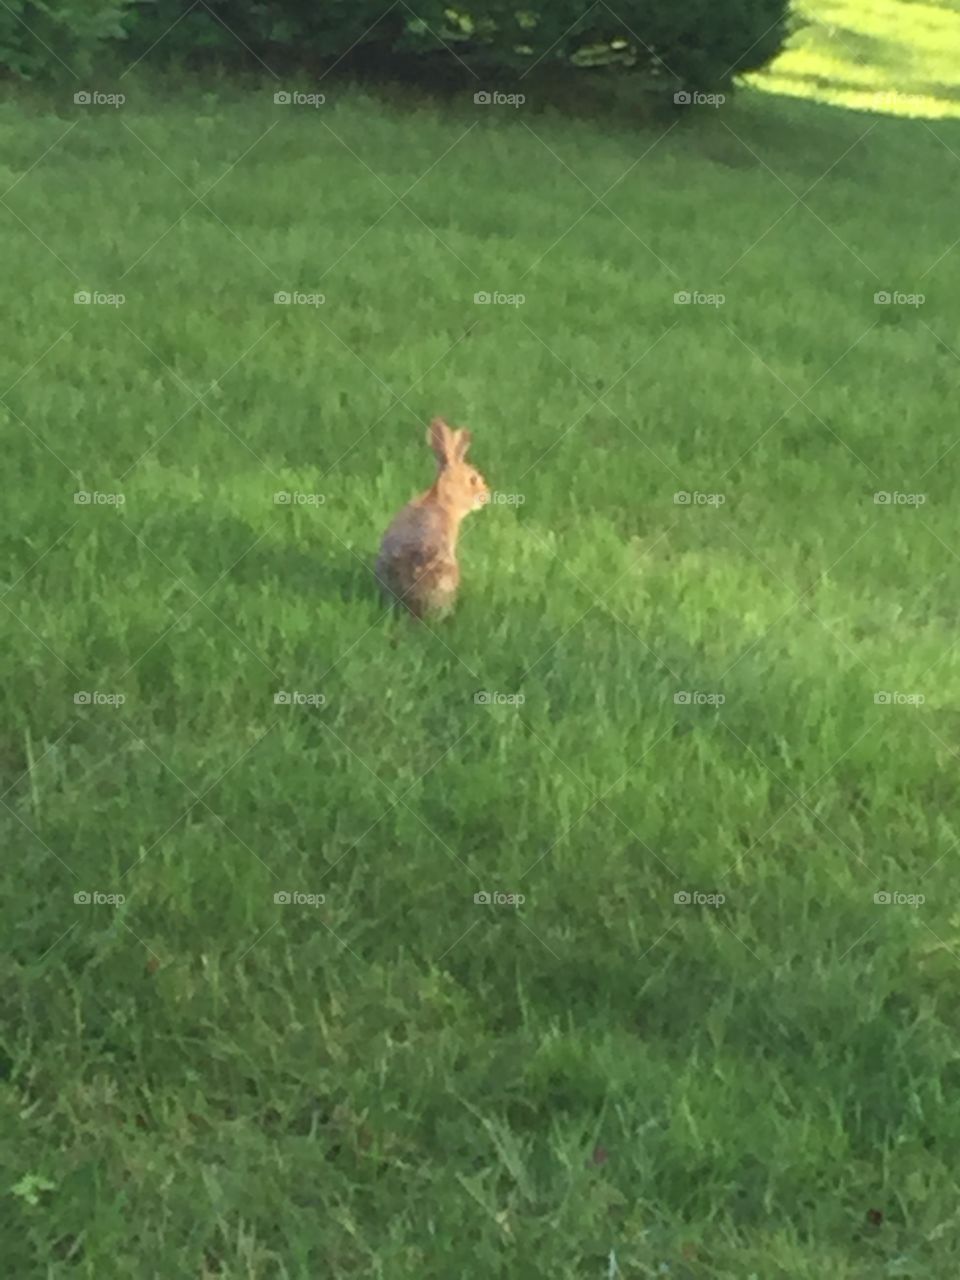 The solitary bunny pondering its existence...